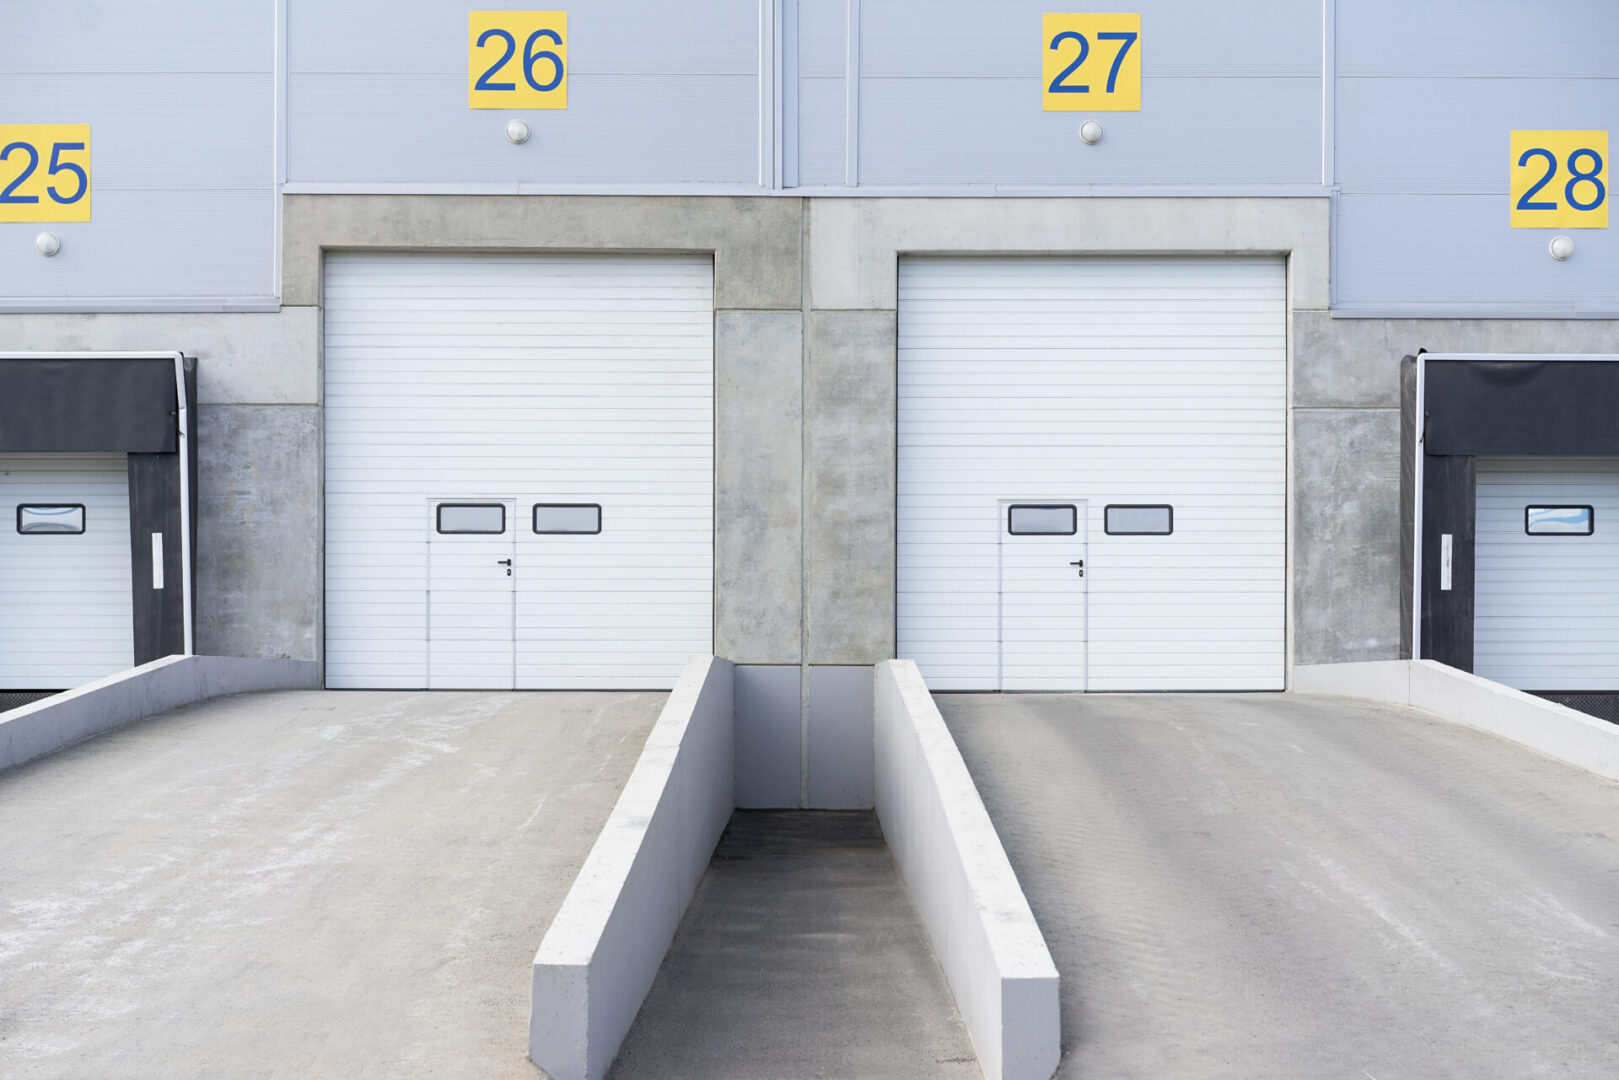 Entrance,Ramps,Of,A,Large,Distribution,Warehouse,With,Gates,For